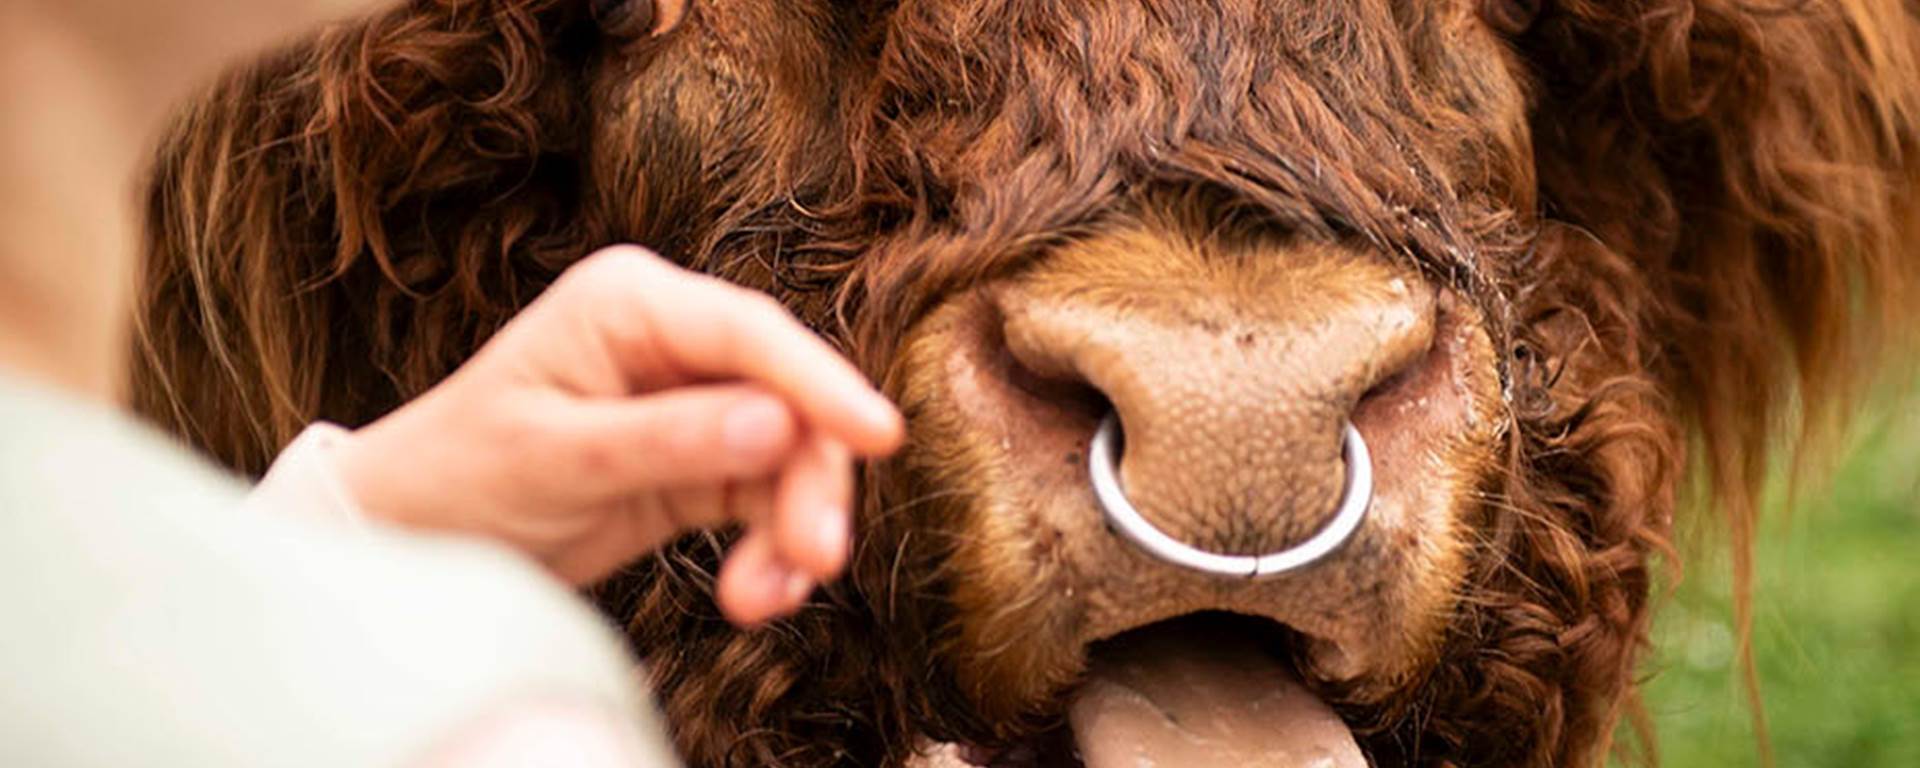 Dougal the Highland Cow sticks his tongue out at friendly guest